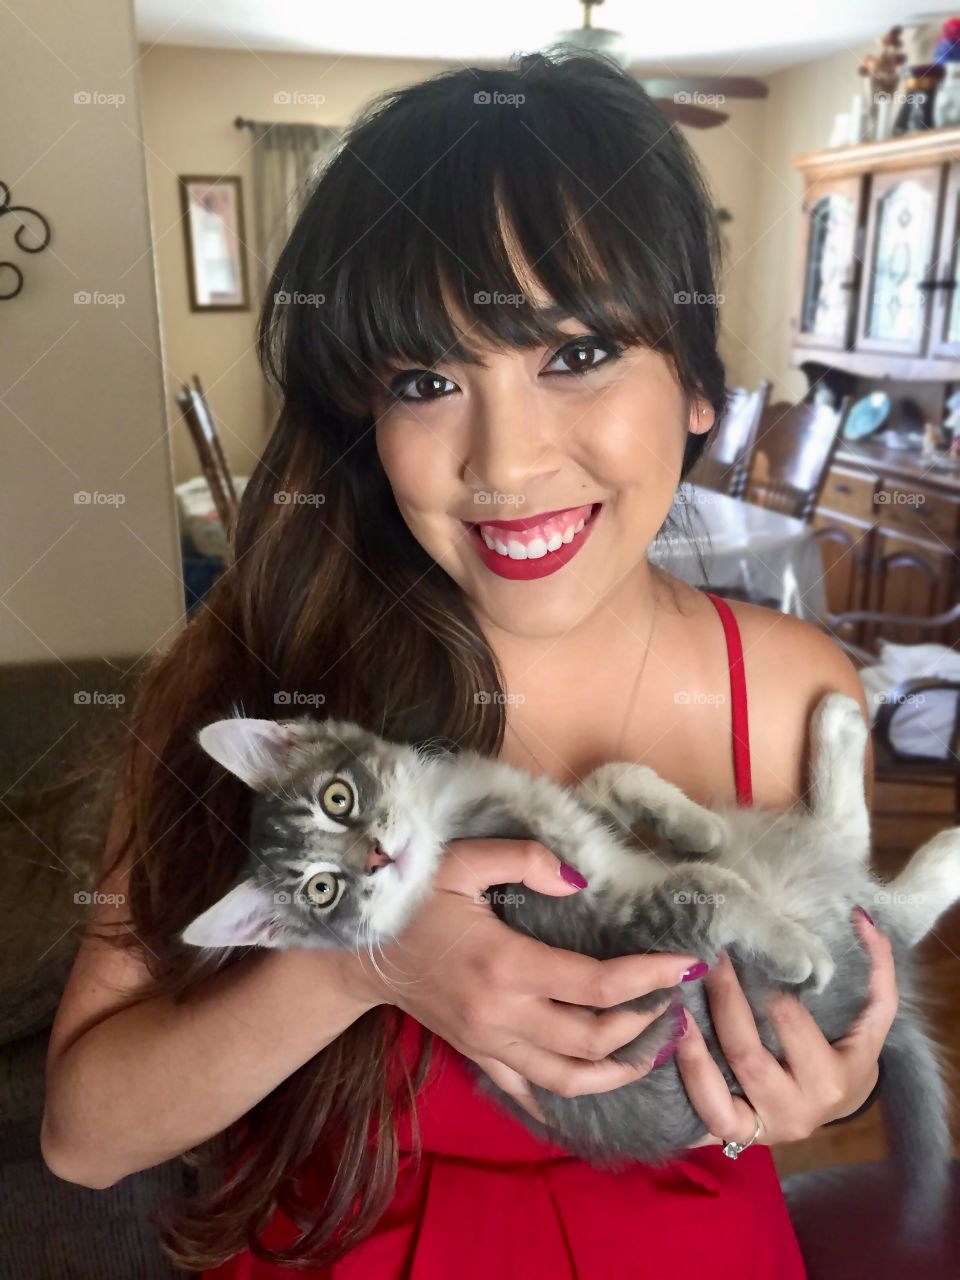 Pretty young woman in red dress and red lipstick holding a cute gray tabby kitten